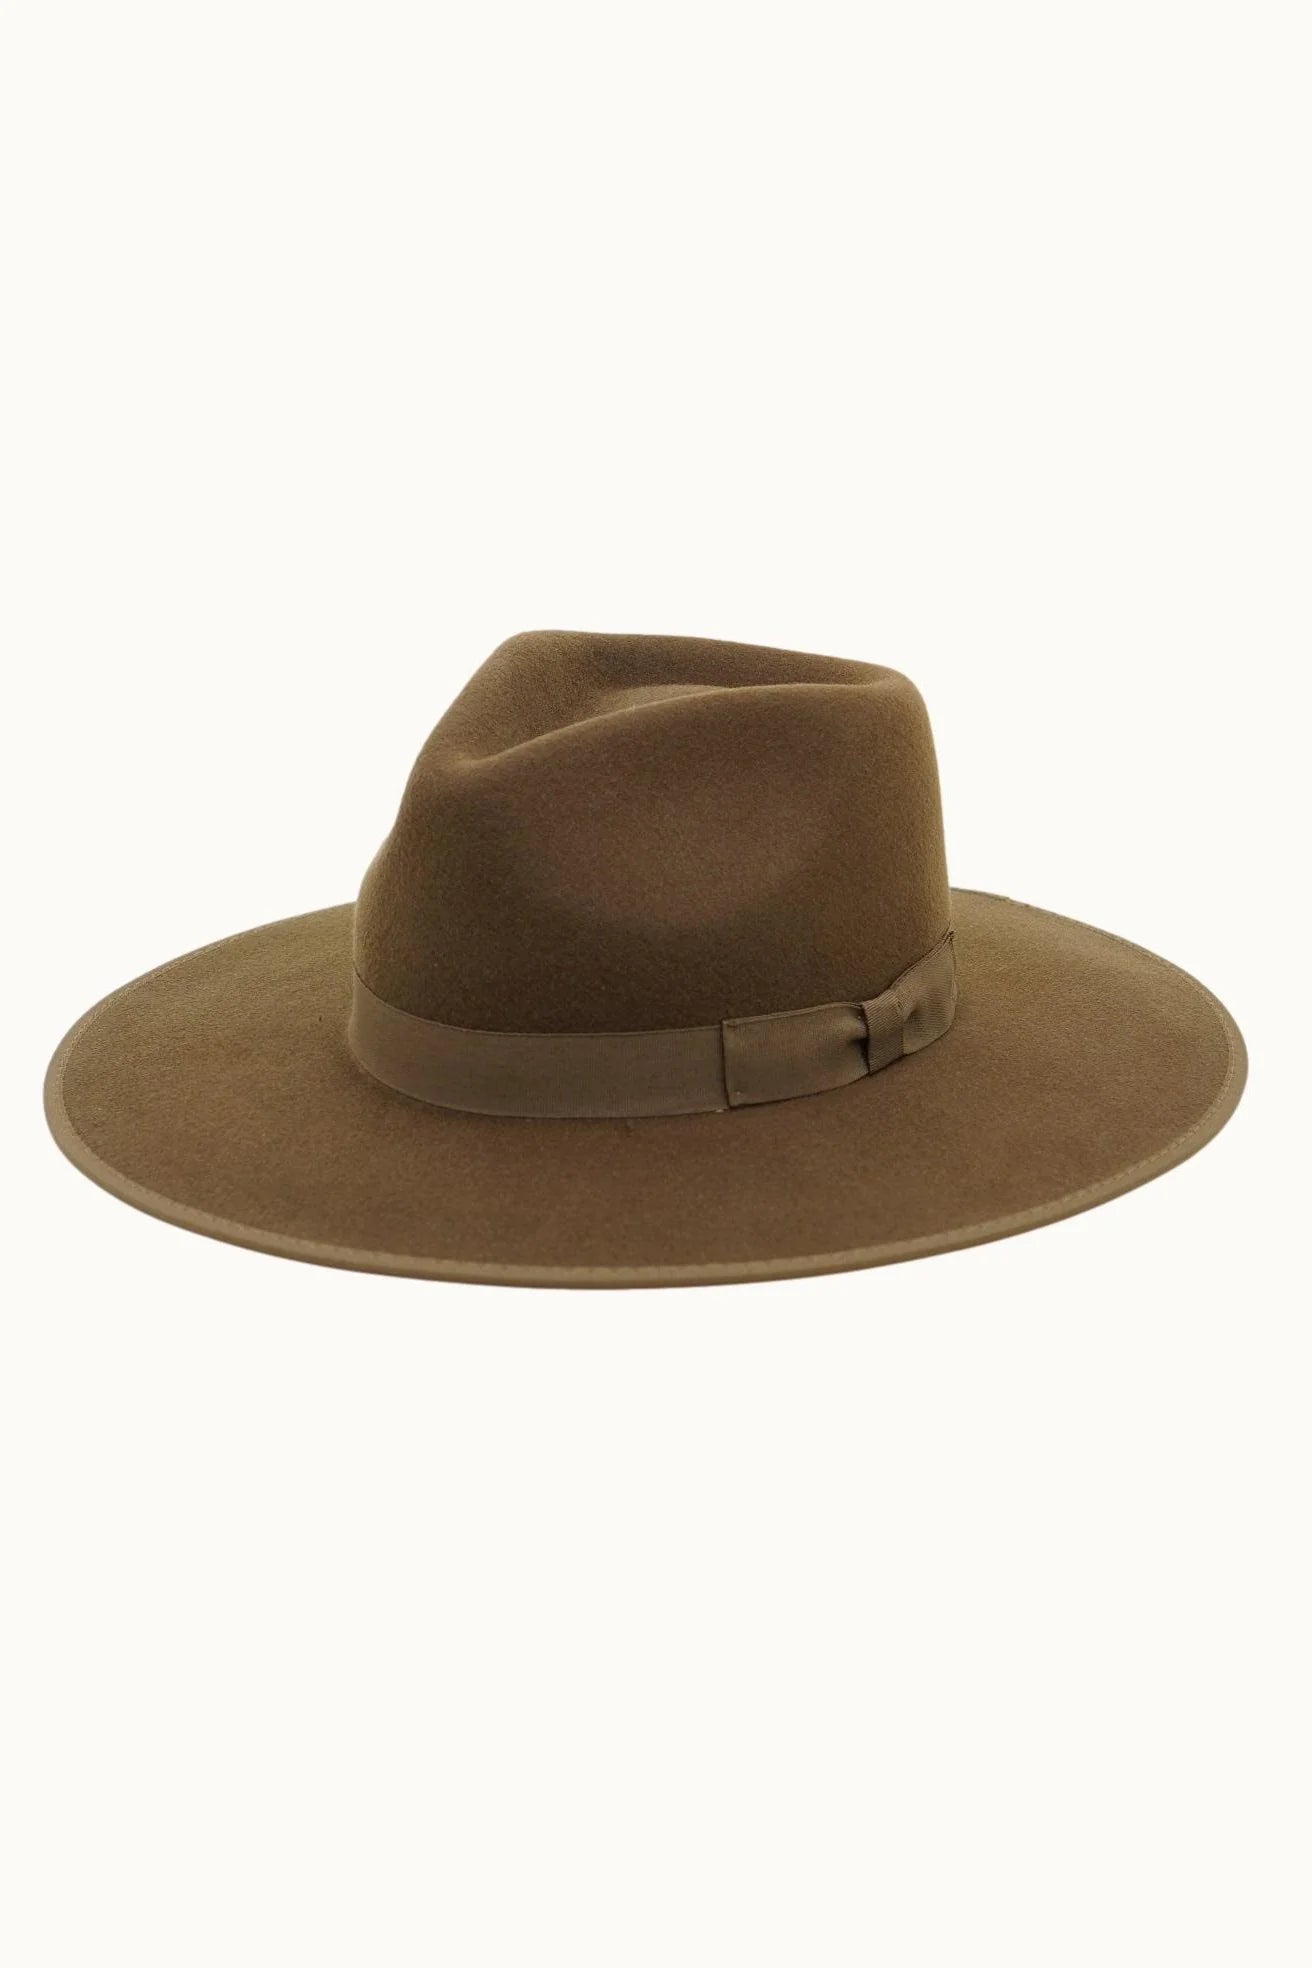 Barry 100% Wool Rancher Hat